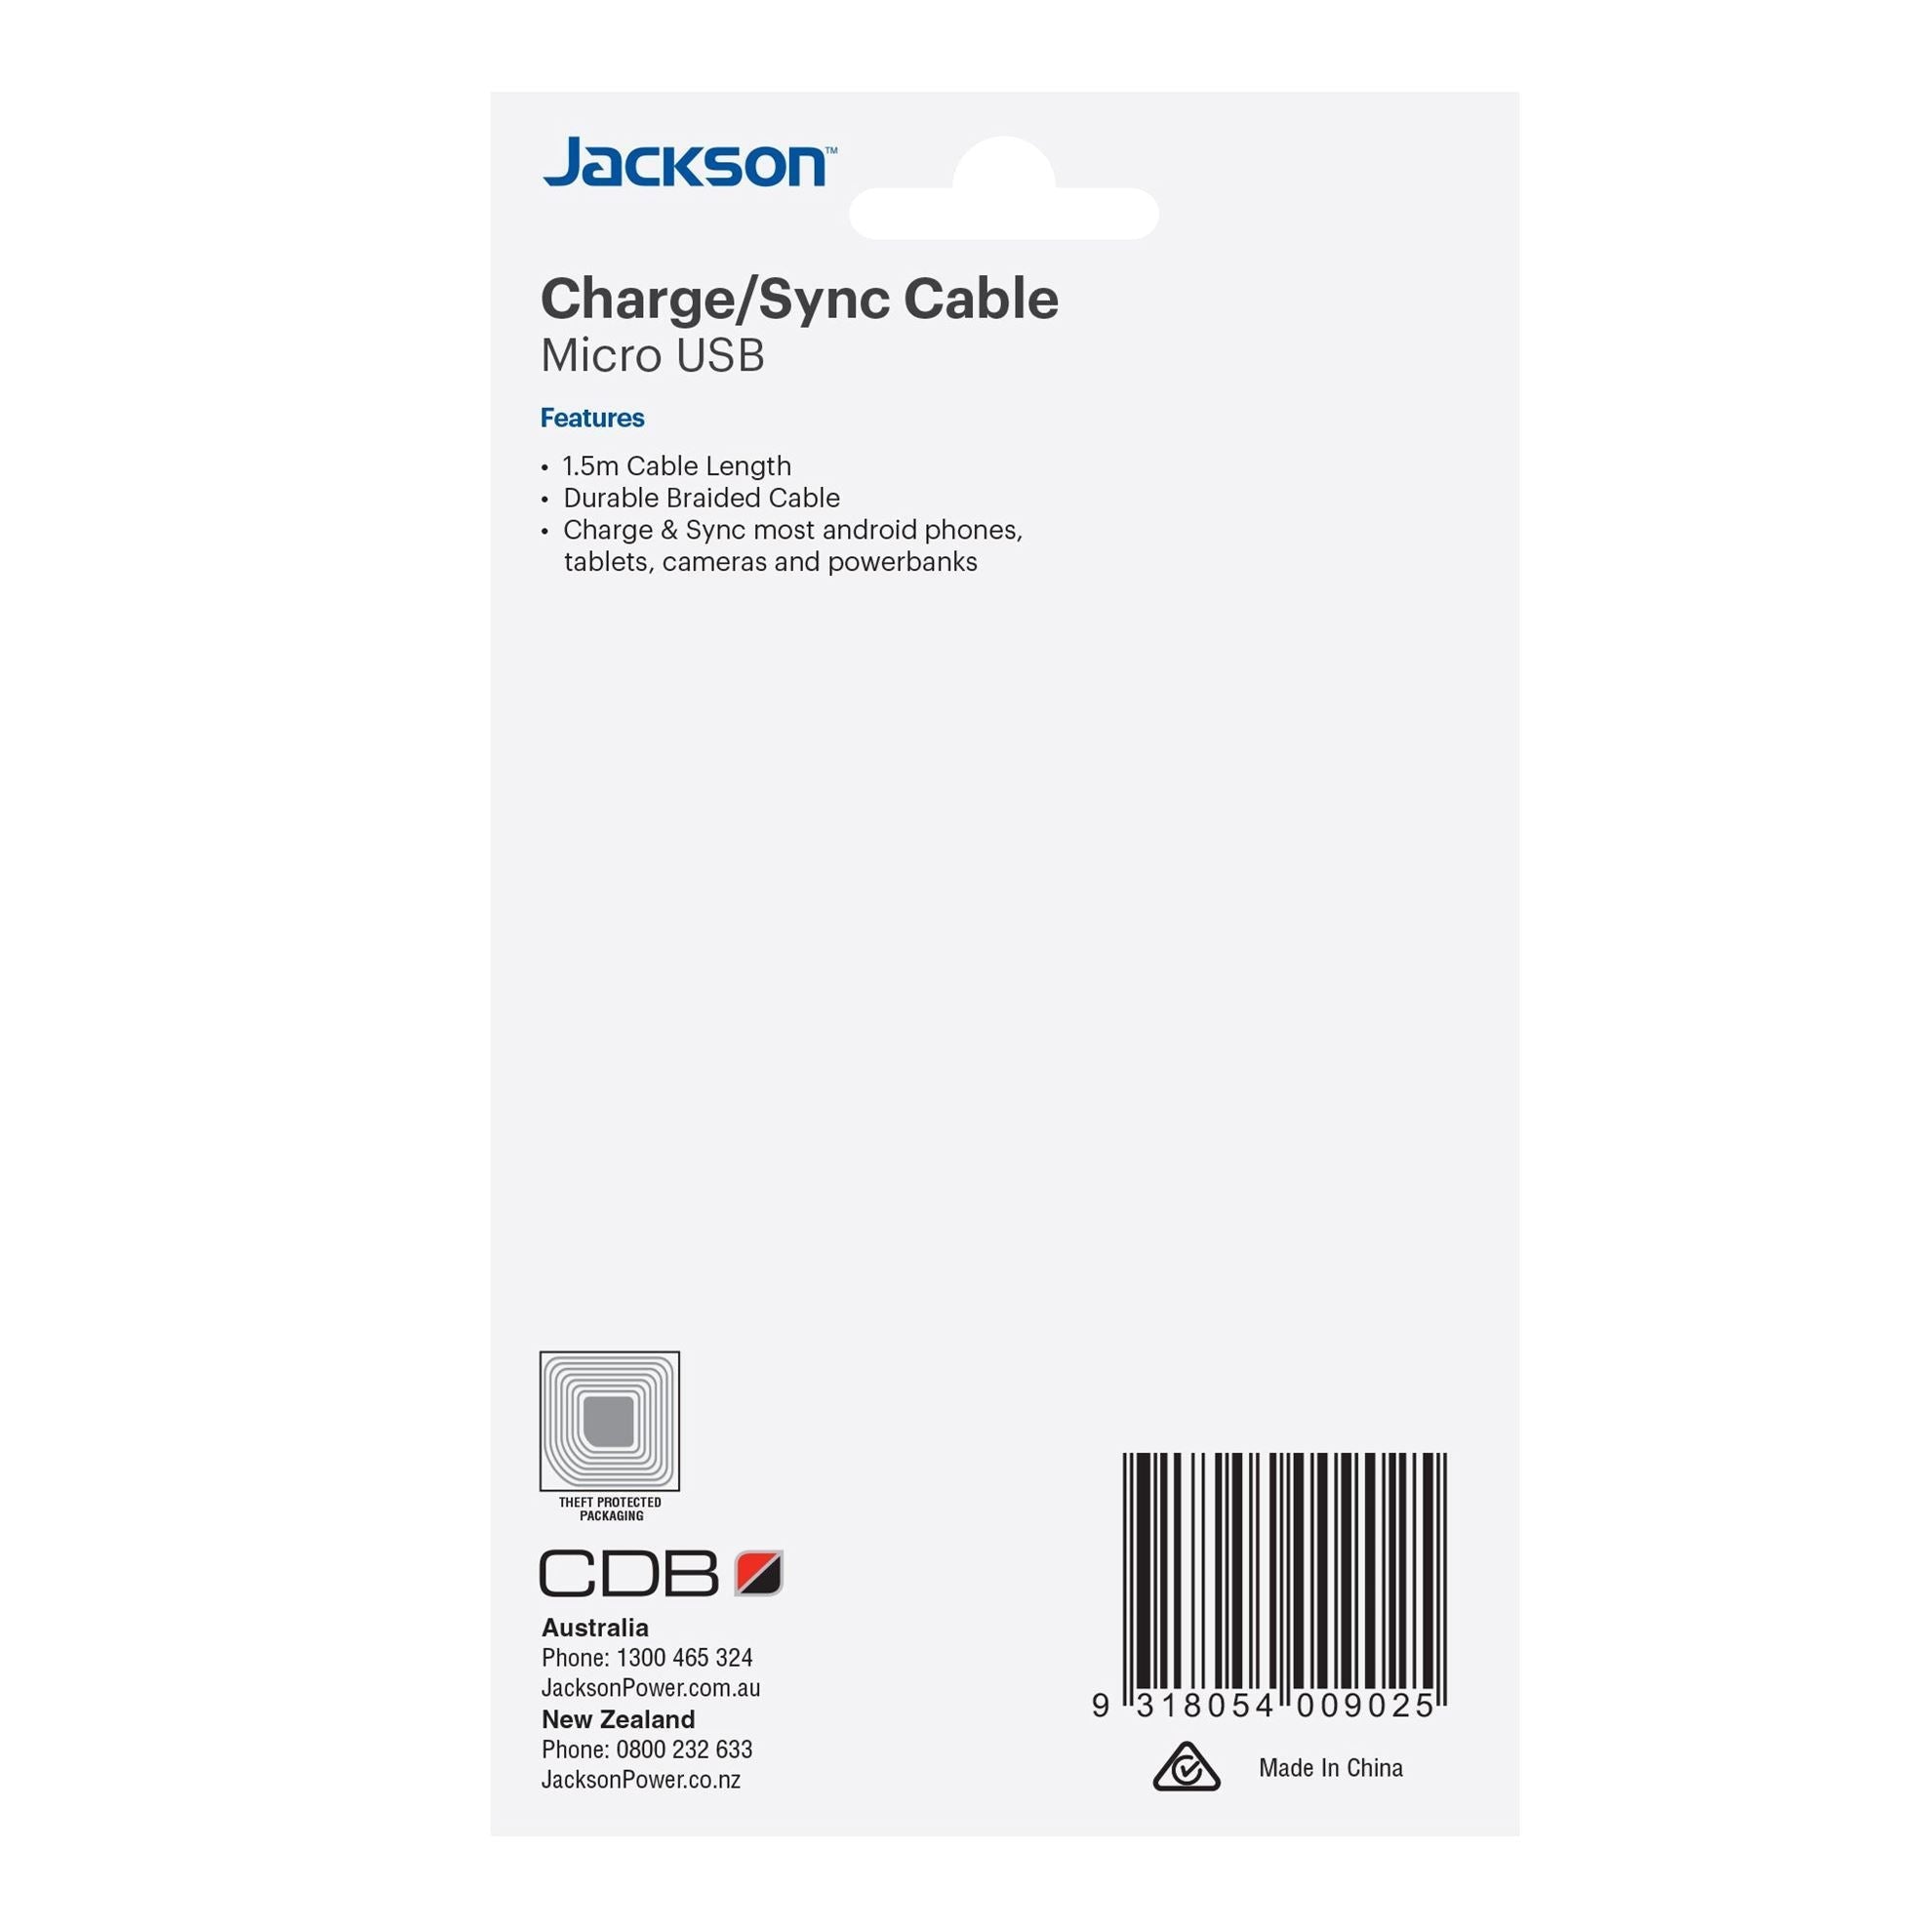 JACKSON_1.5m_USB-A_to_Micro_USB_Sync_&_Charge_Cable._Braided_Cable_Provides_Extra_Durability._Black_Colour. 157